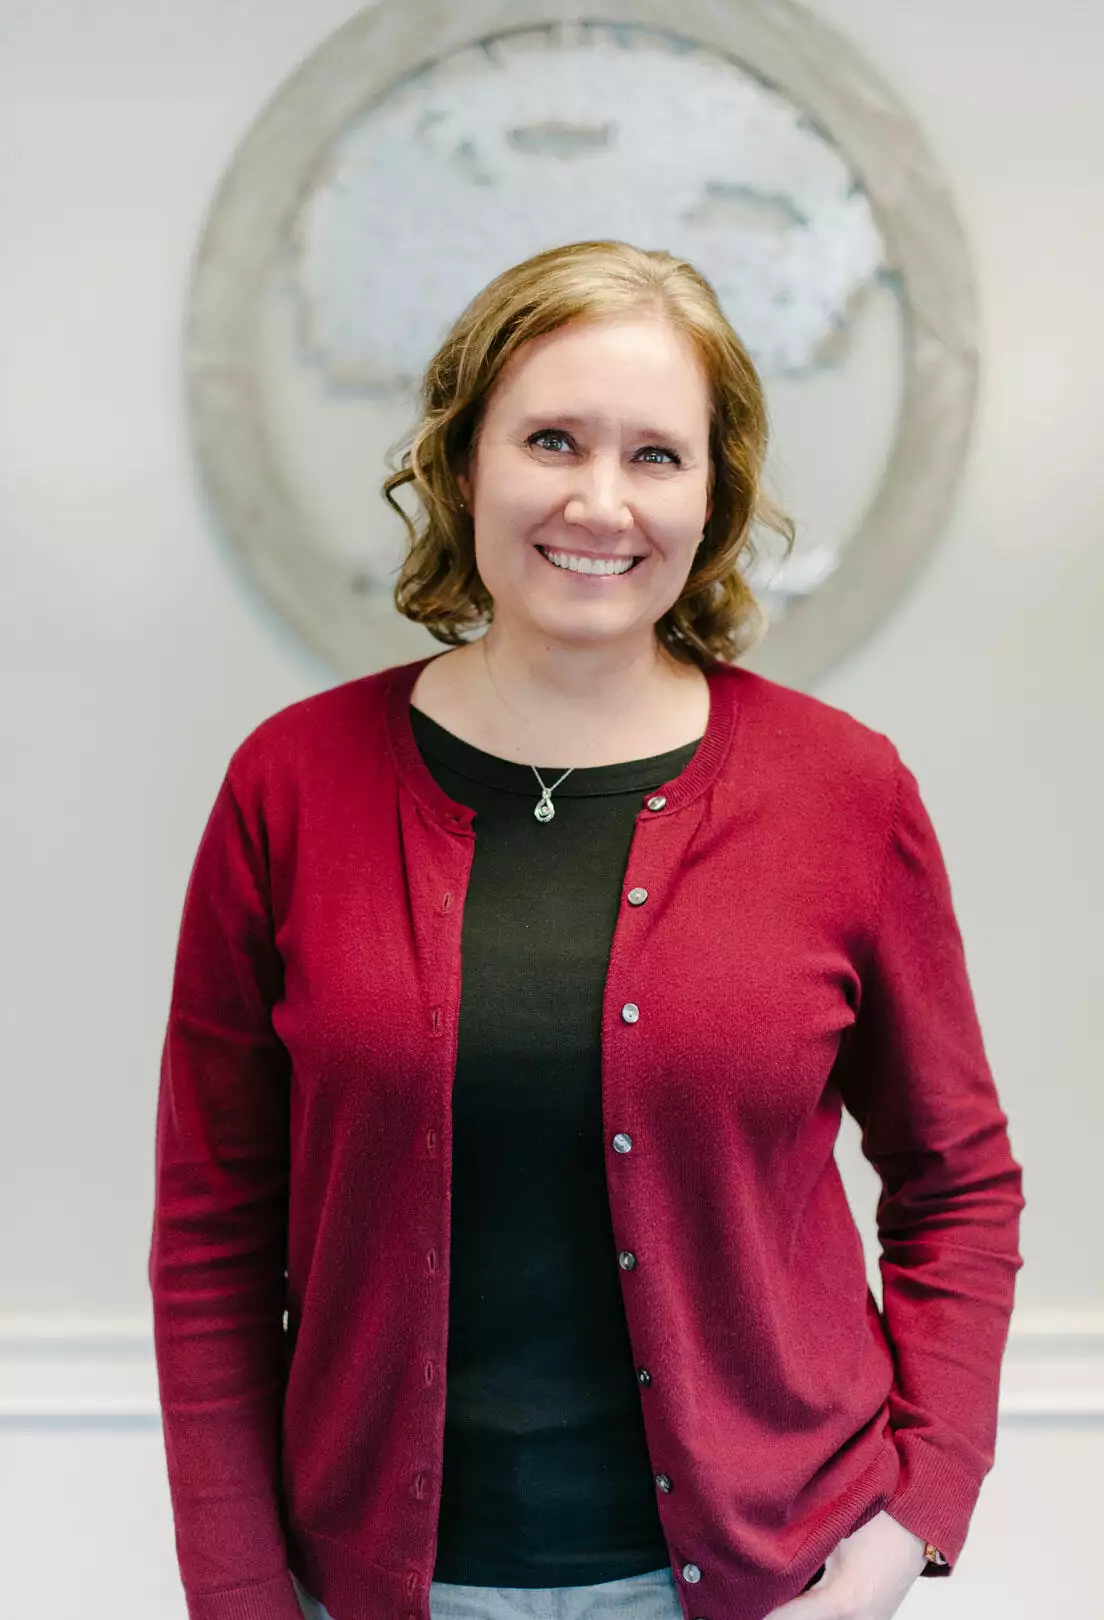 Image of Jennifer Mosteller, a staff member at Living Tree Medical, in professional clothing